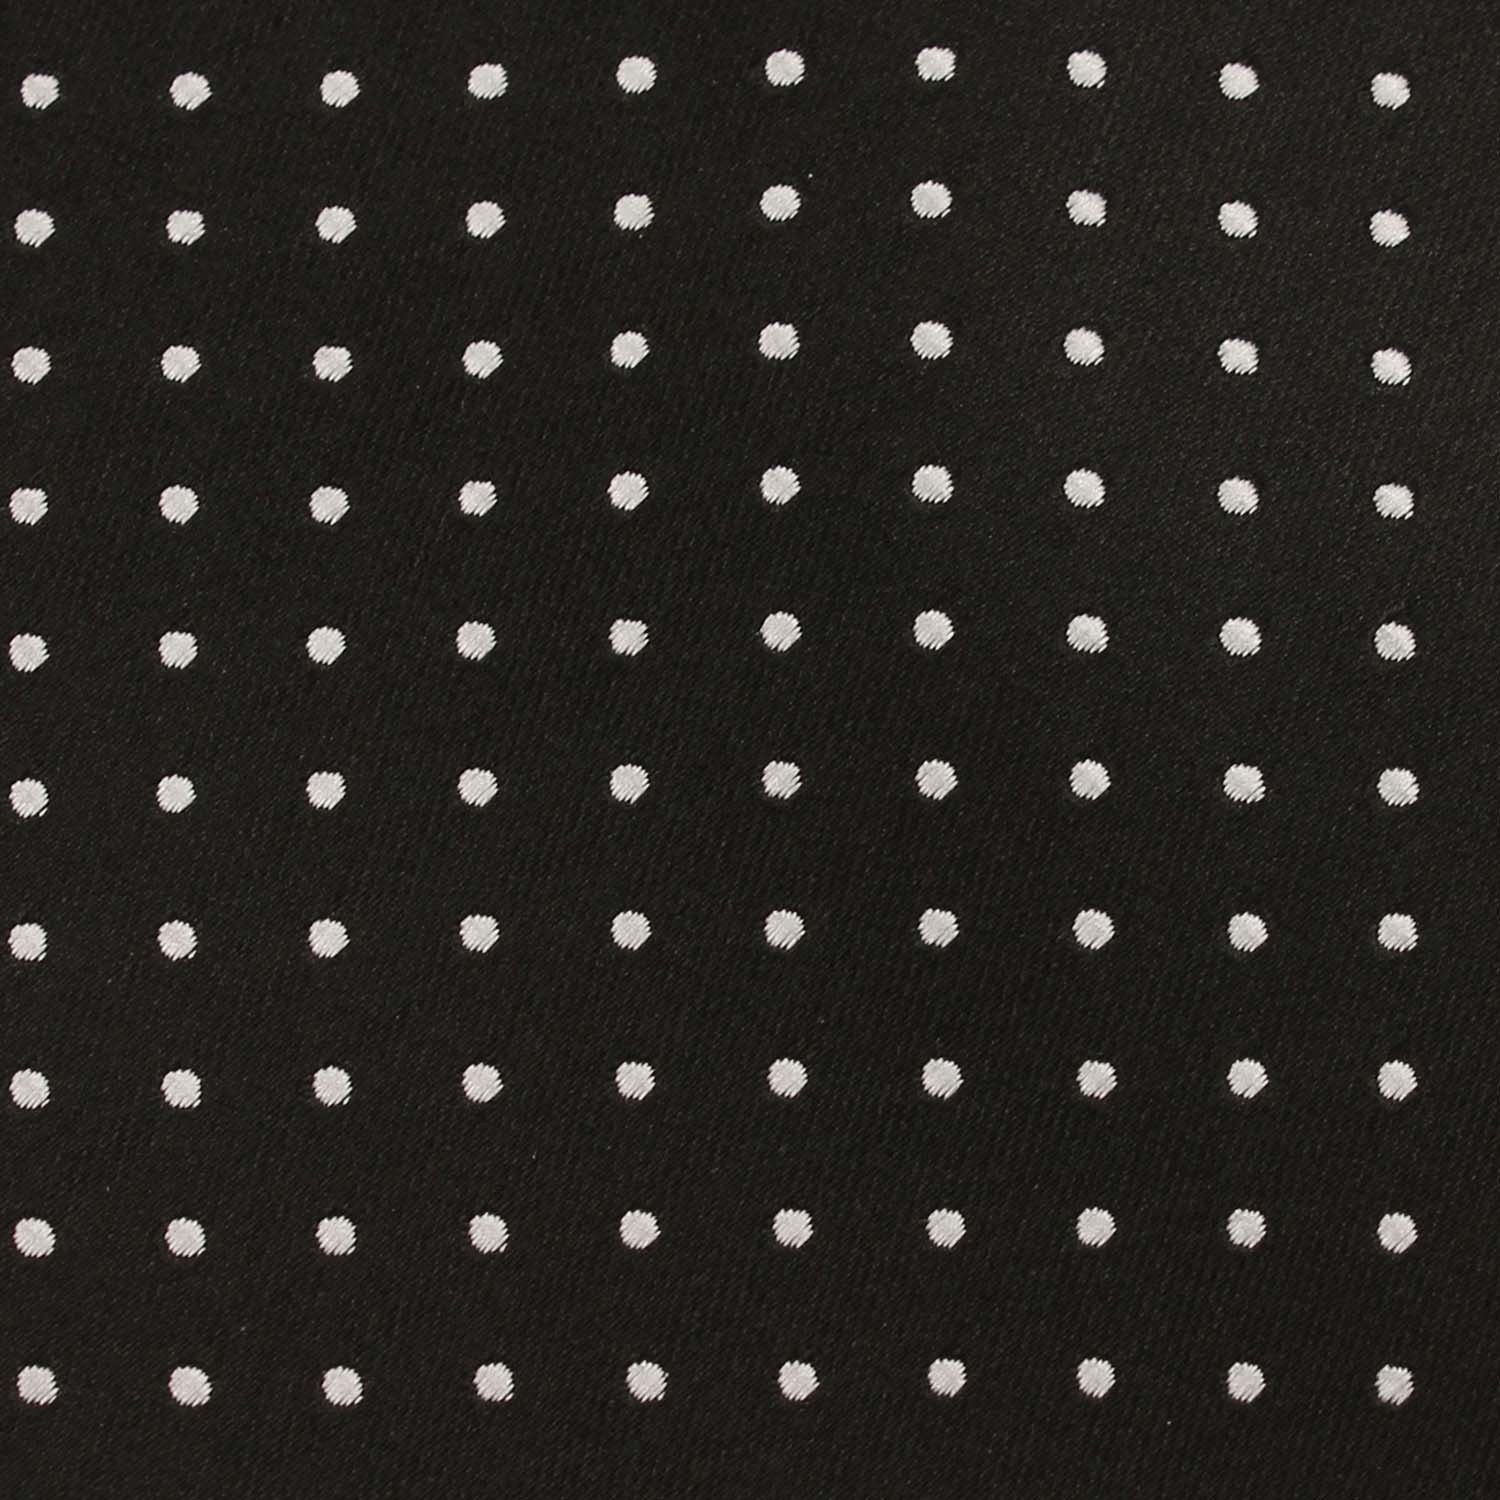 Black with Small White Polka Dots Fabric Pocket Square X444